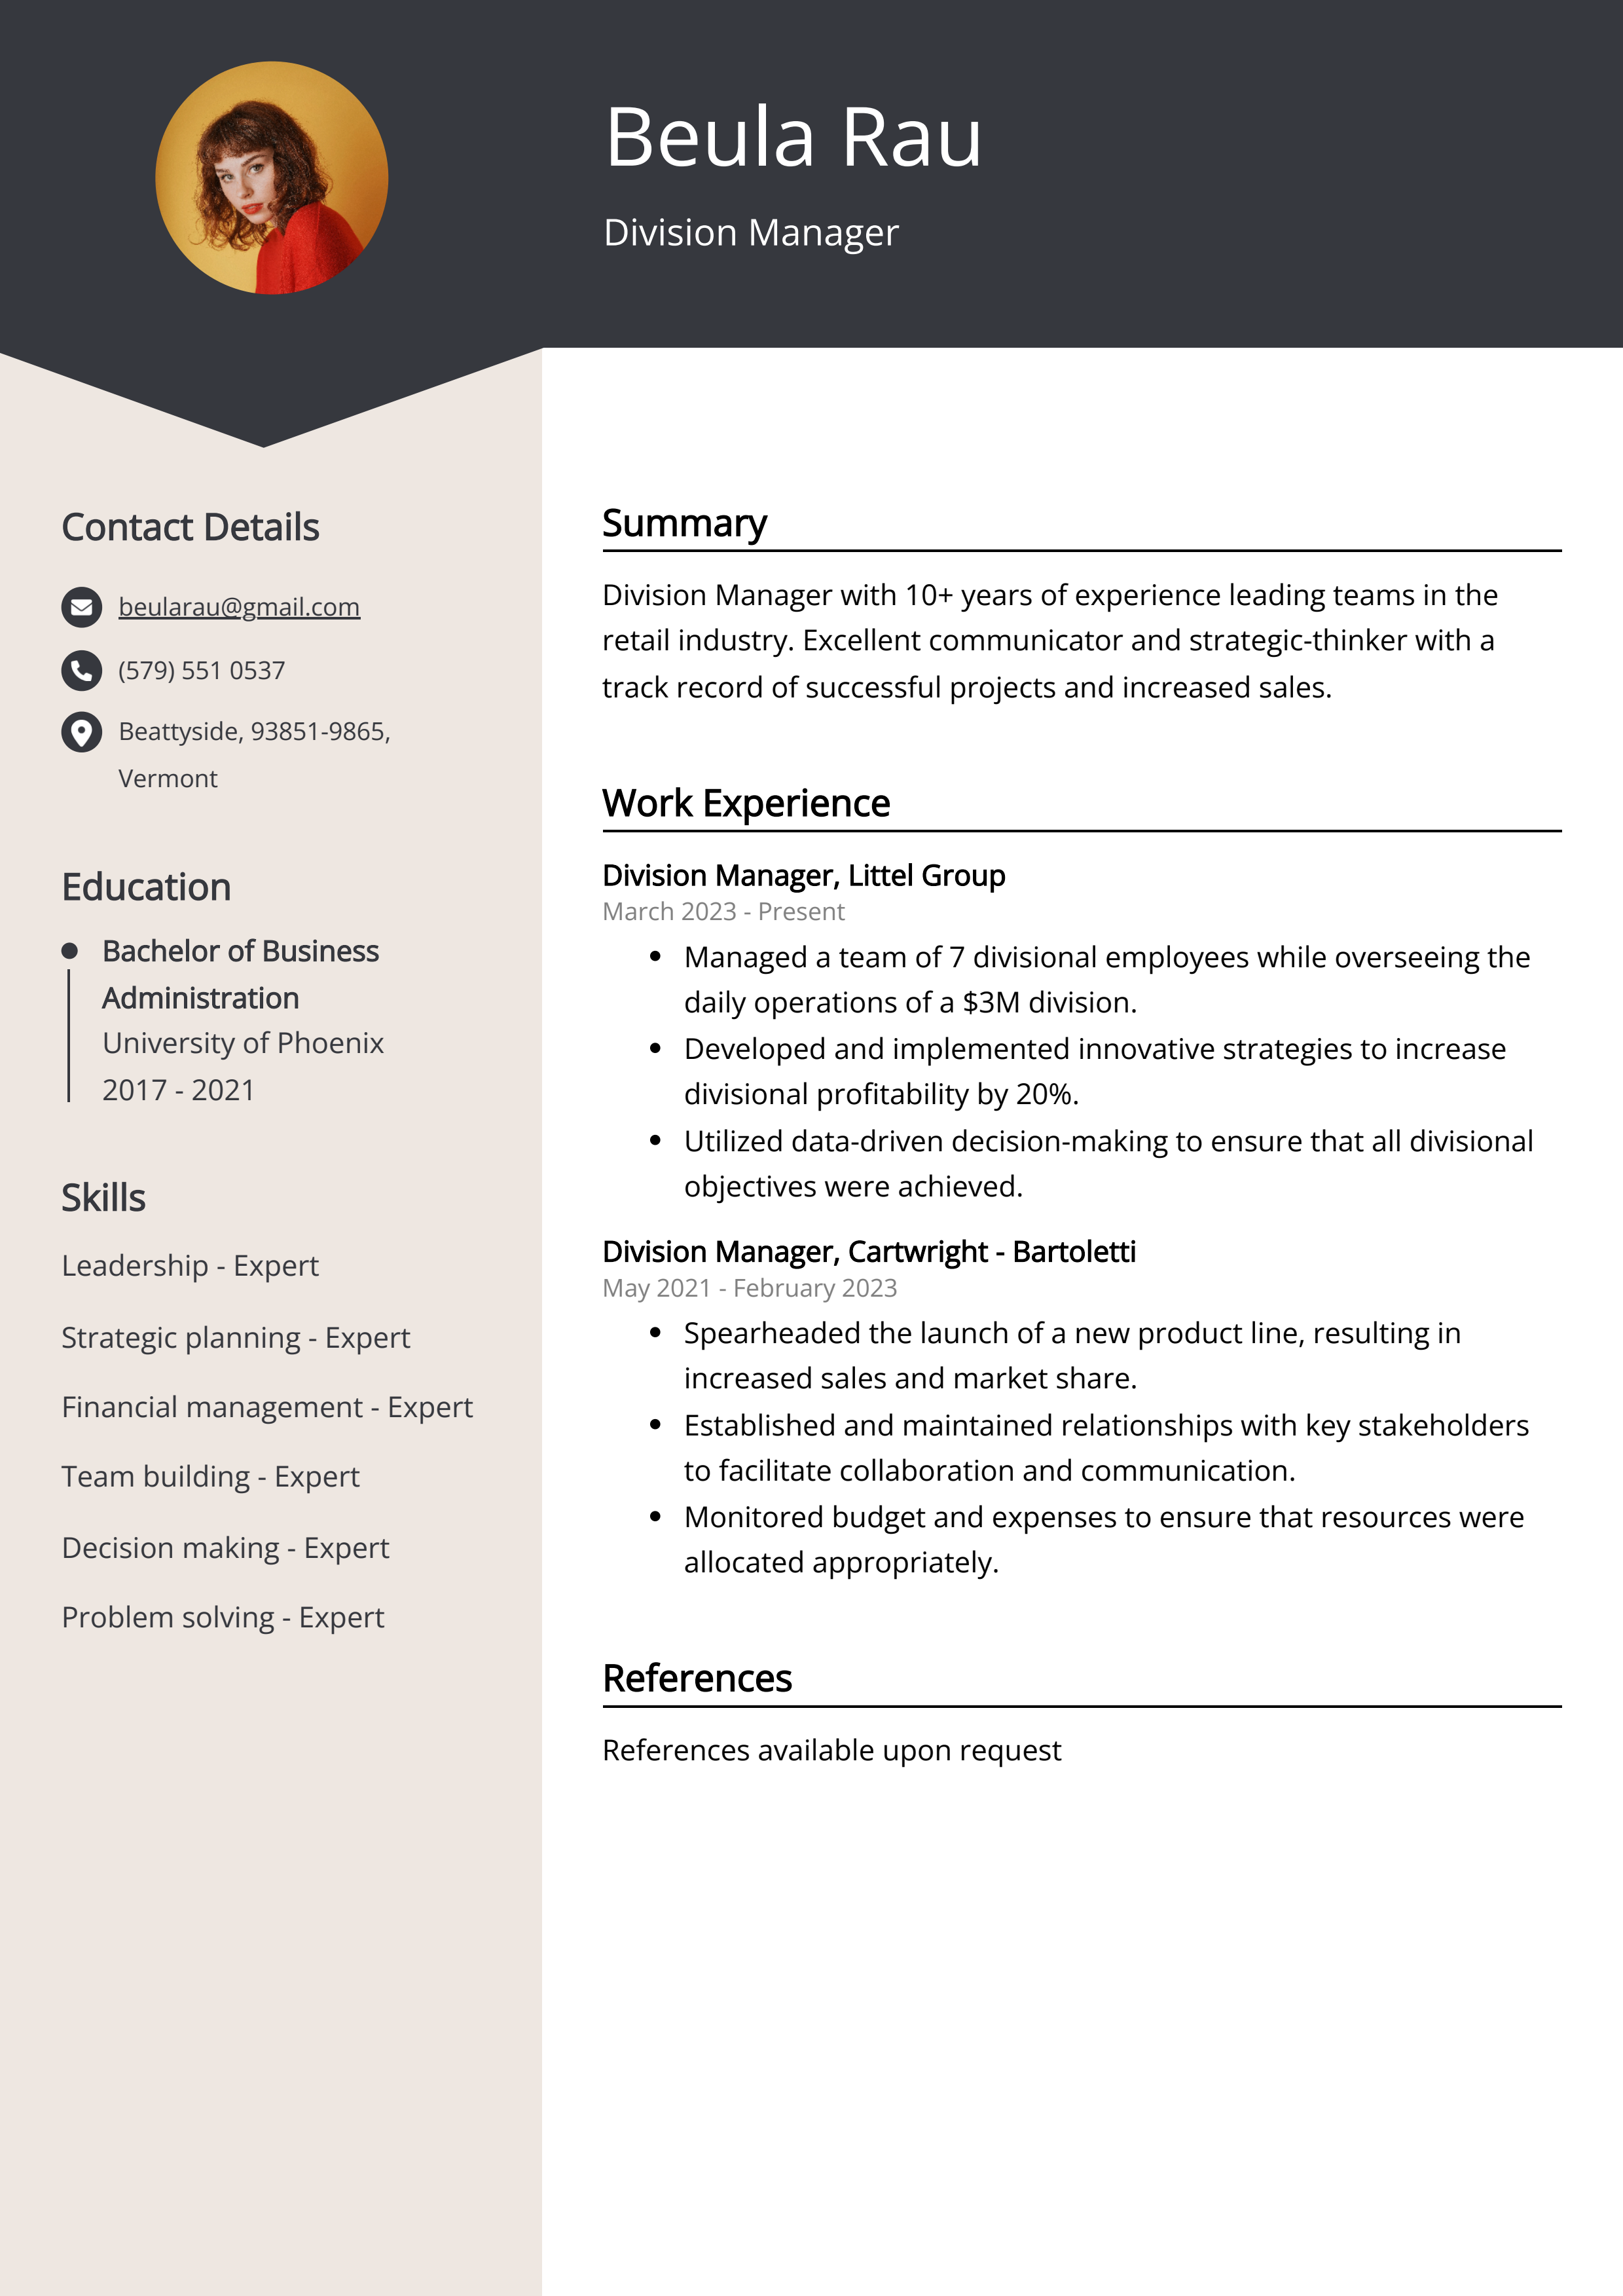 Division Manager Resume Example